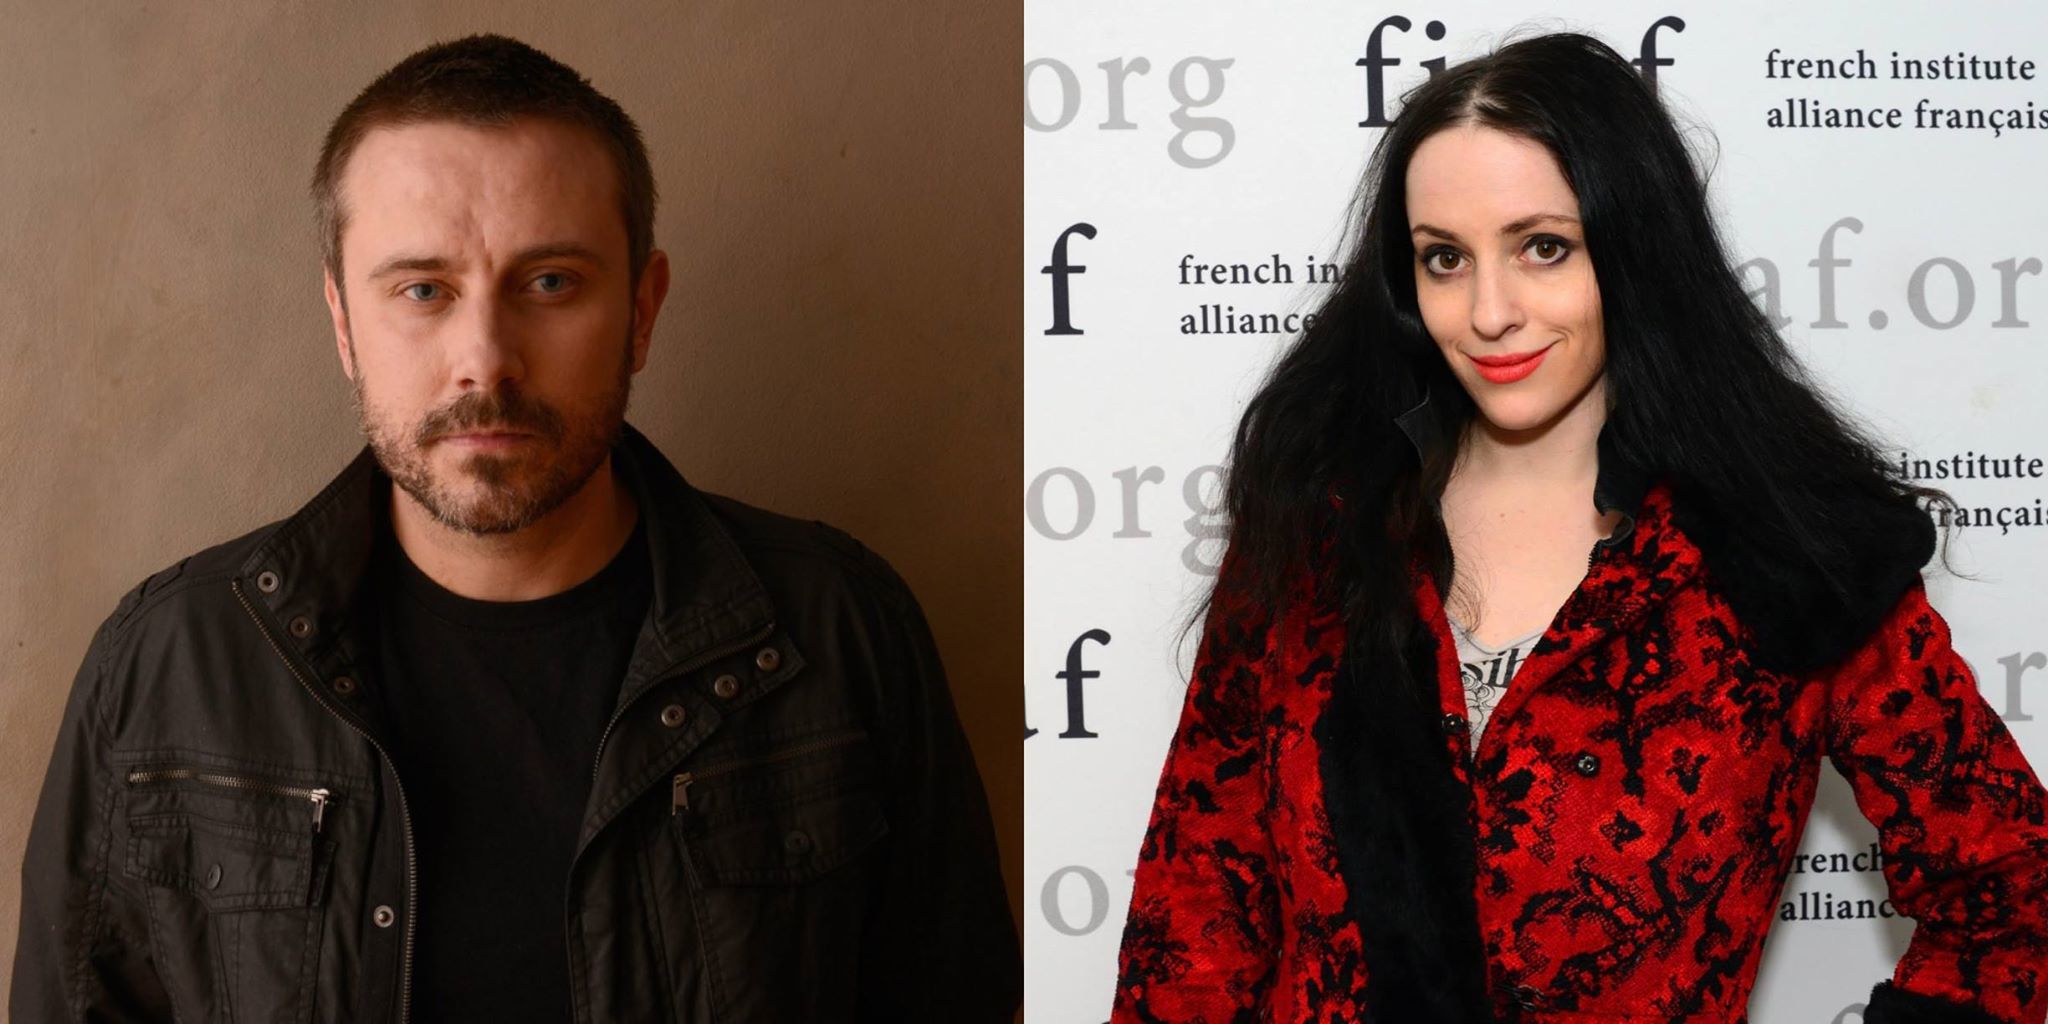 Jeremy Scahill in Conversation with Molly Crabapple Saturday, May 9